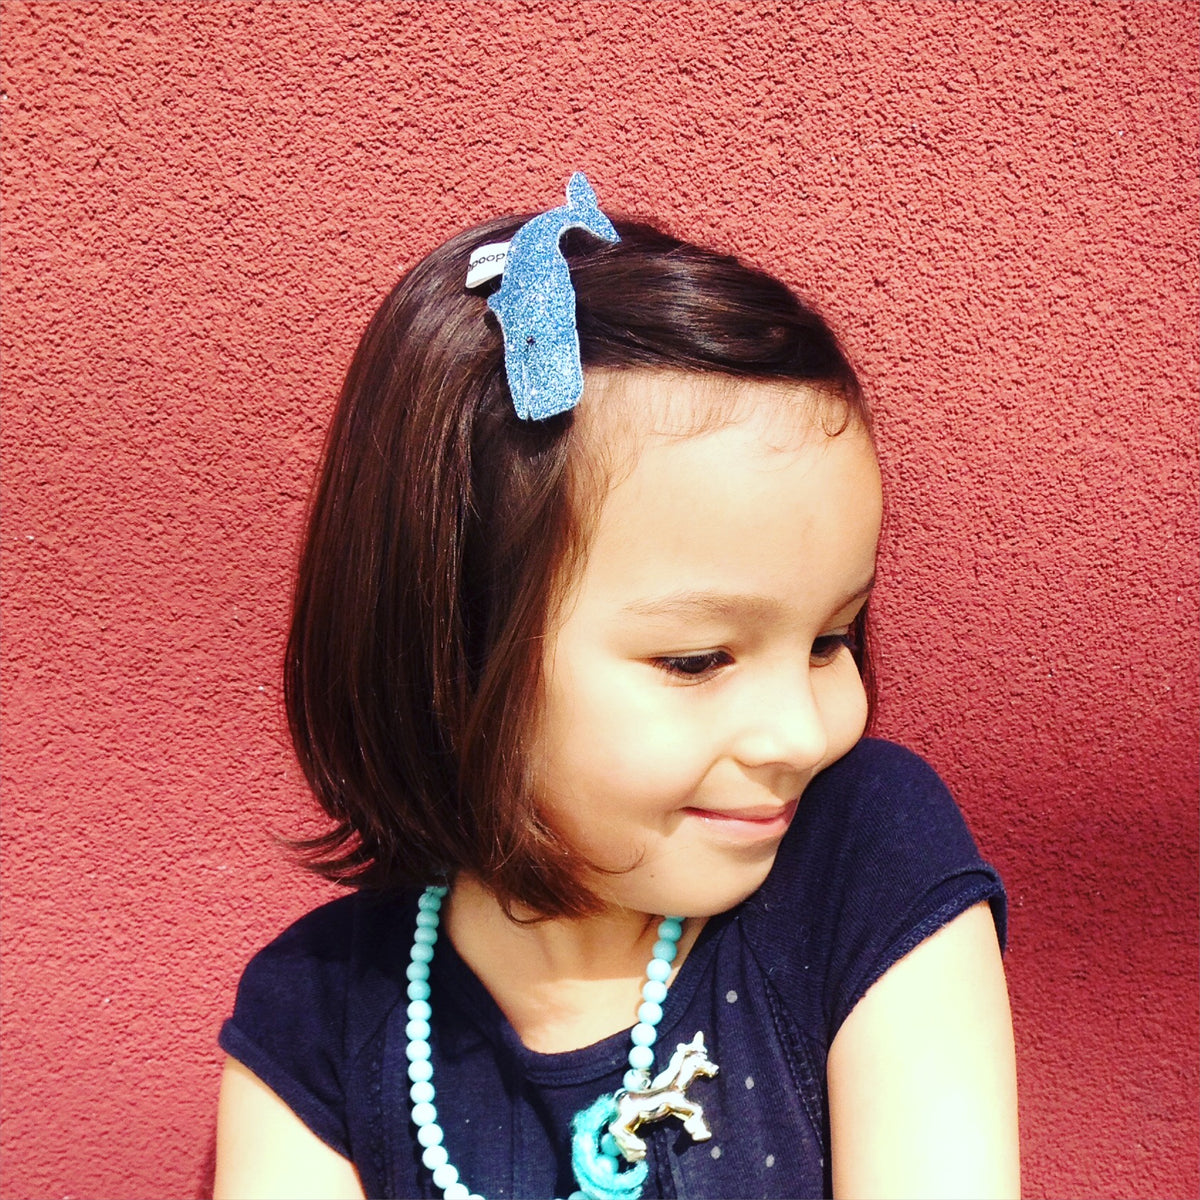 Your little girl will look adorable with our sparkly whale hair clip.